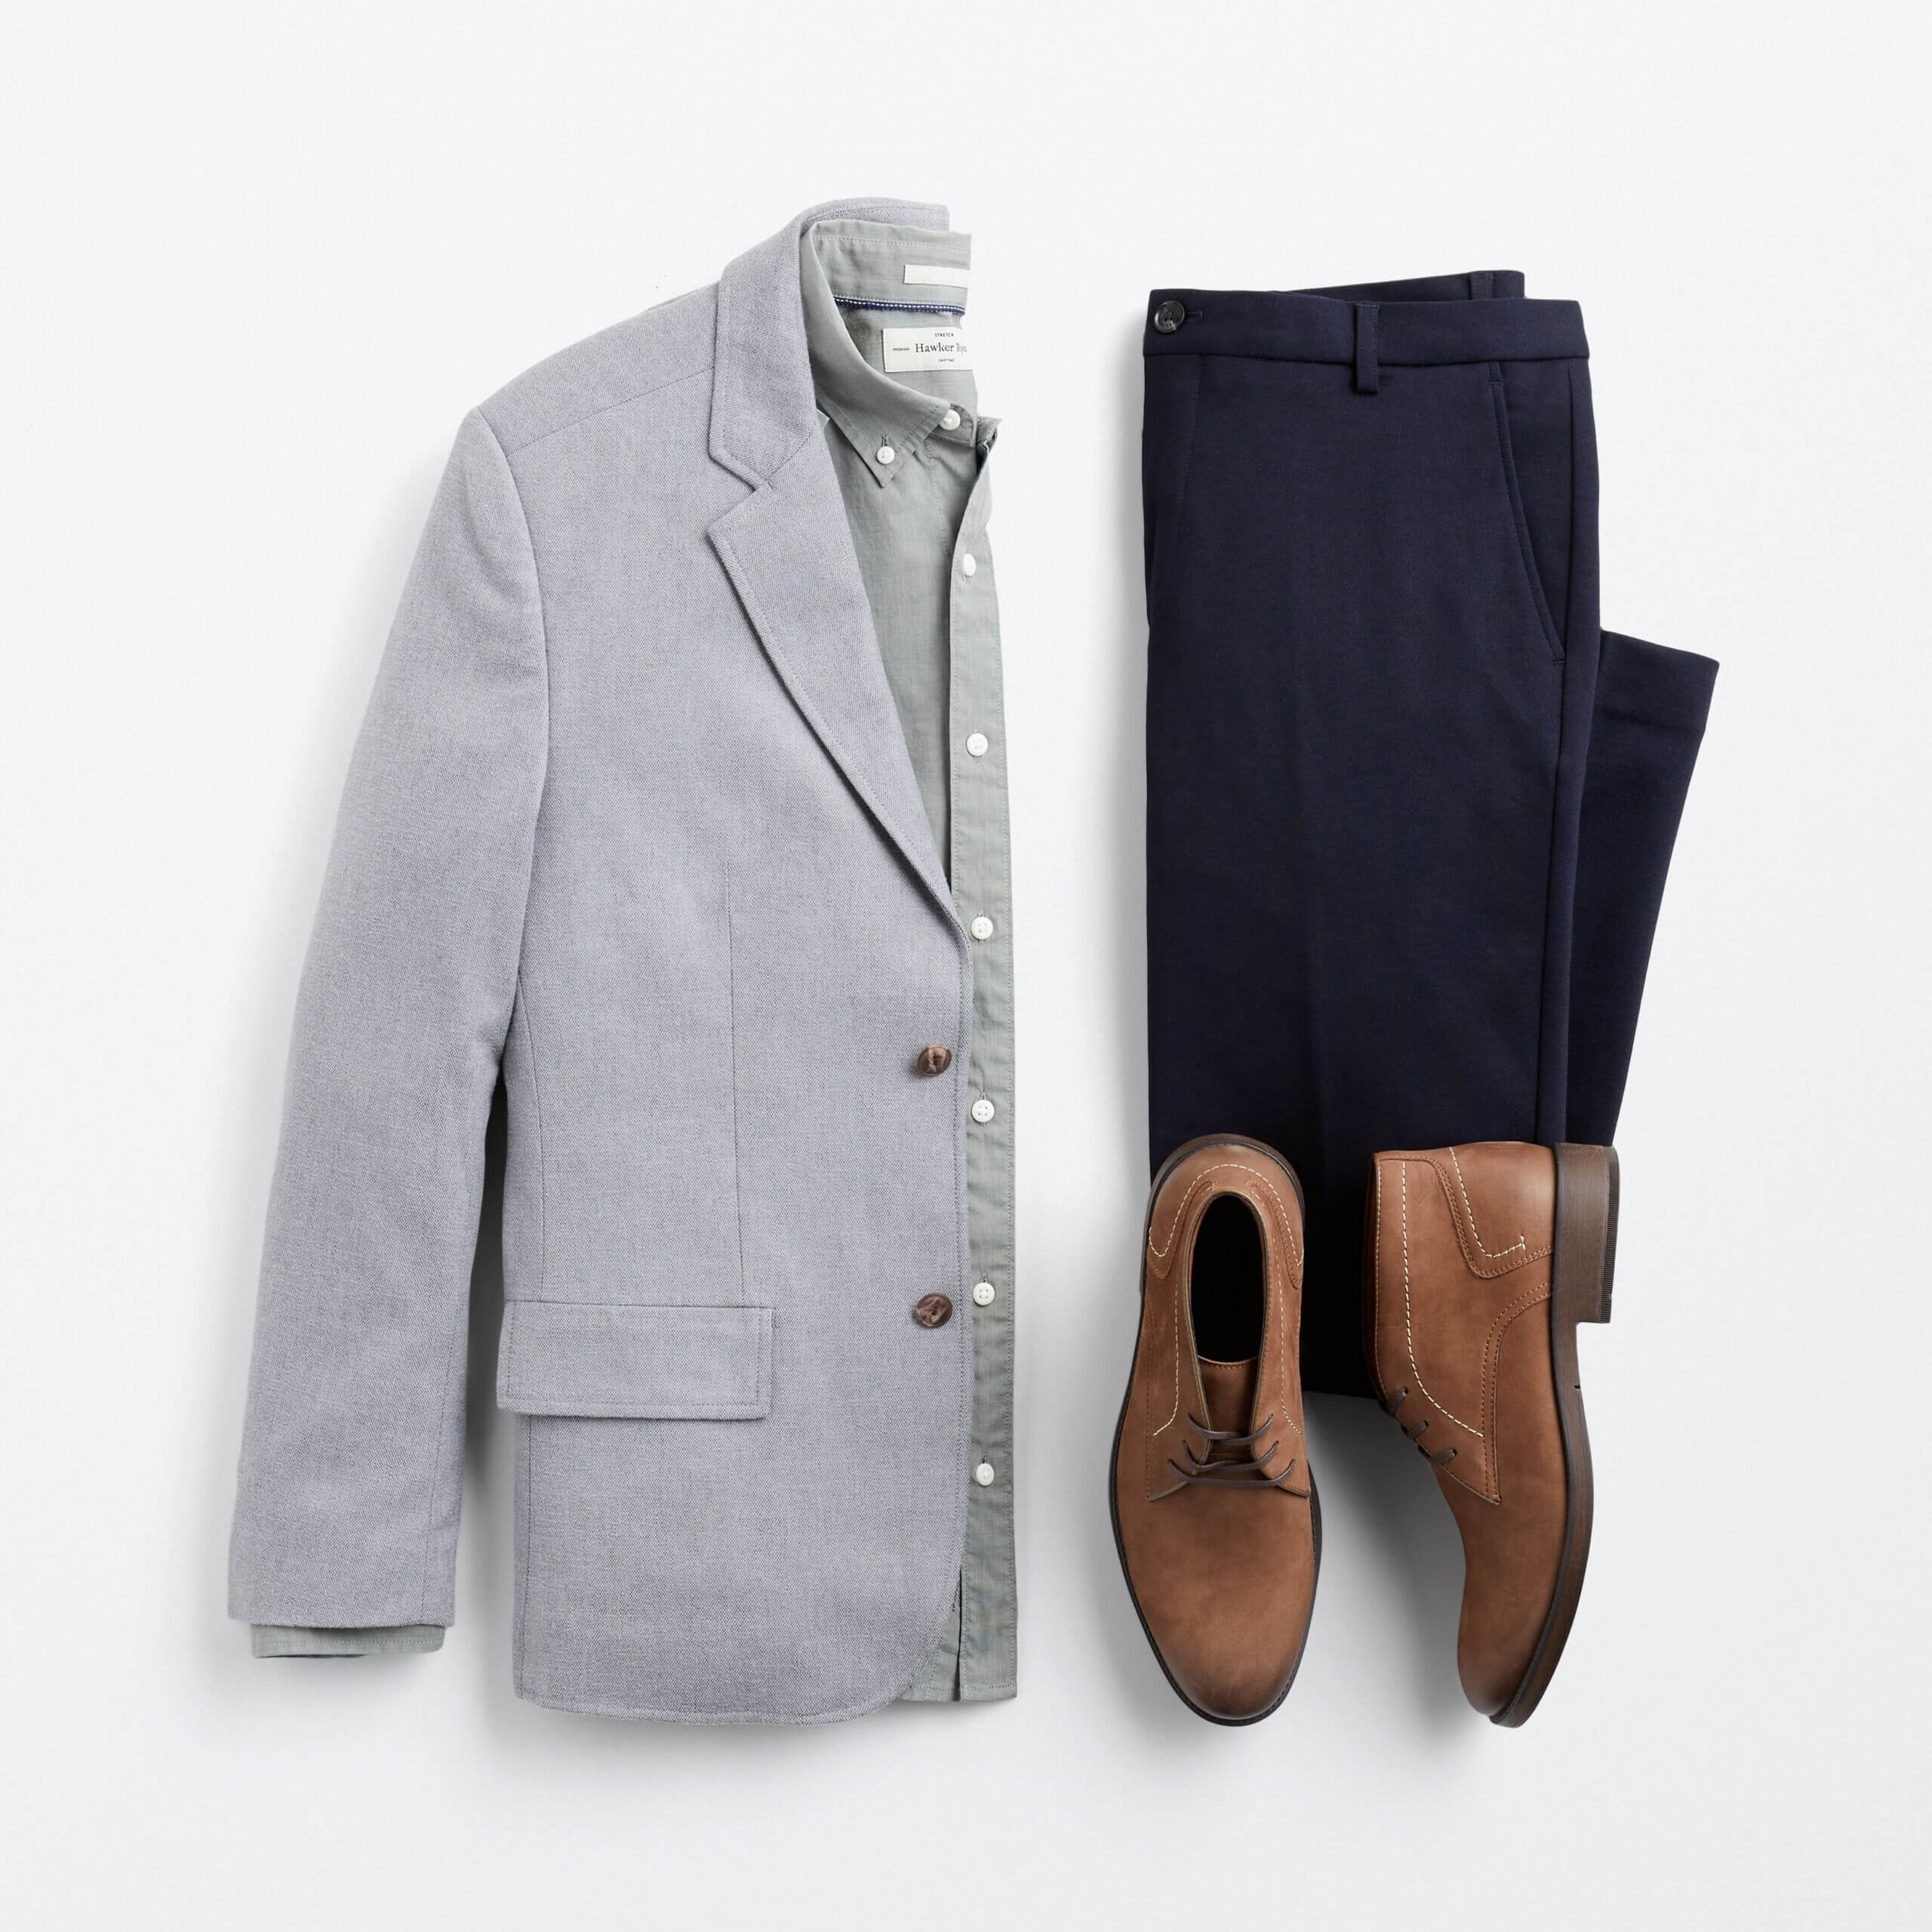 Stitch Fix men’s graduation outfit featuring a grey sport coat over a light green button-down shirt, navy pants and brown chukkas.